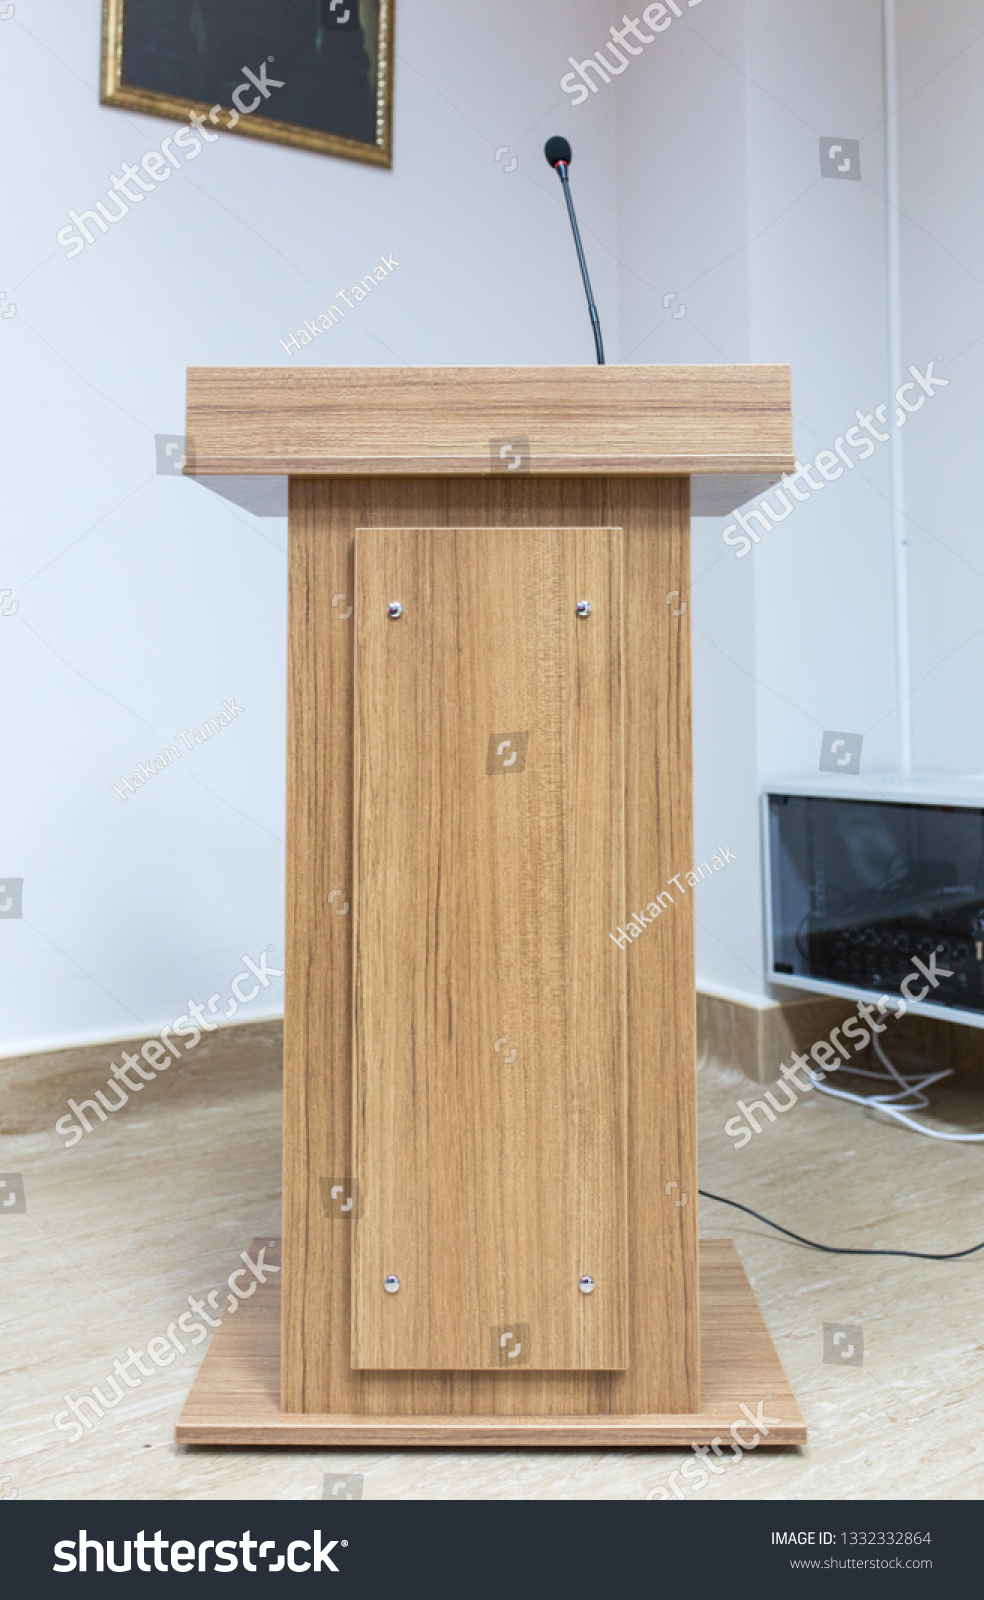 Wooden speech stand and microphone in conference room #1332332864